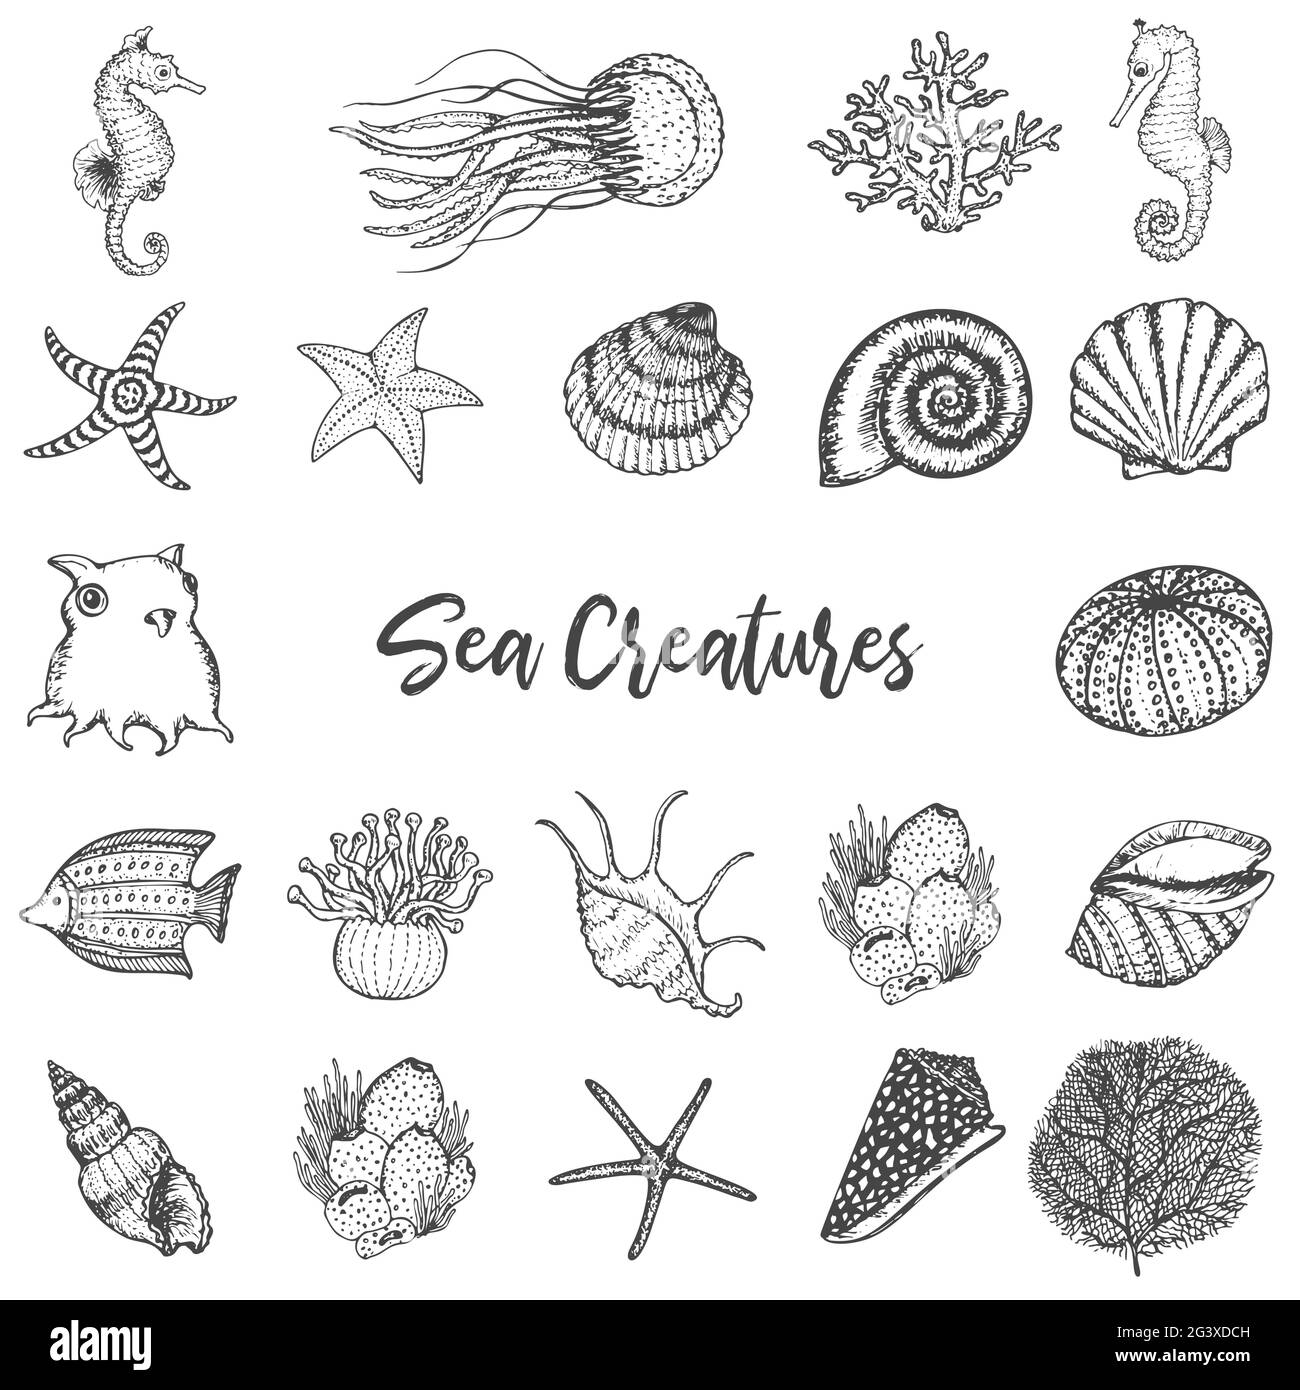 Ocean creatures Black and White Stock Photos & Images - Alamy